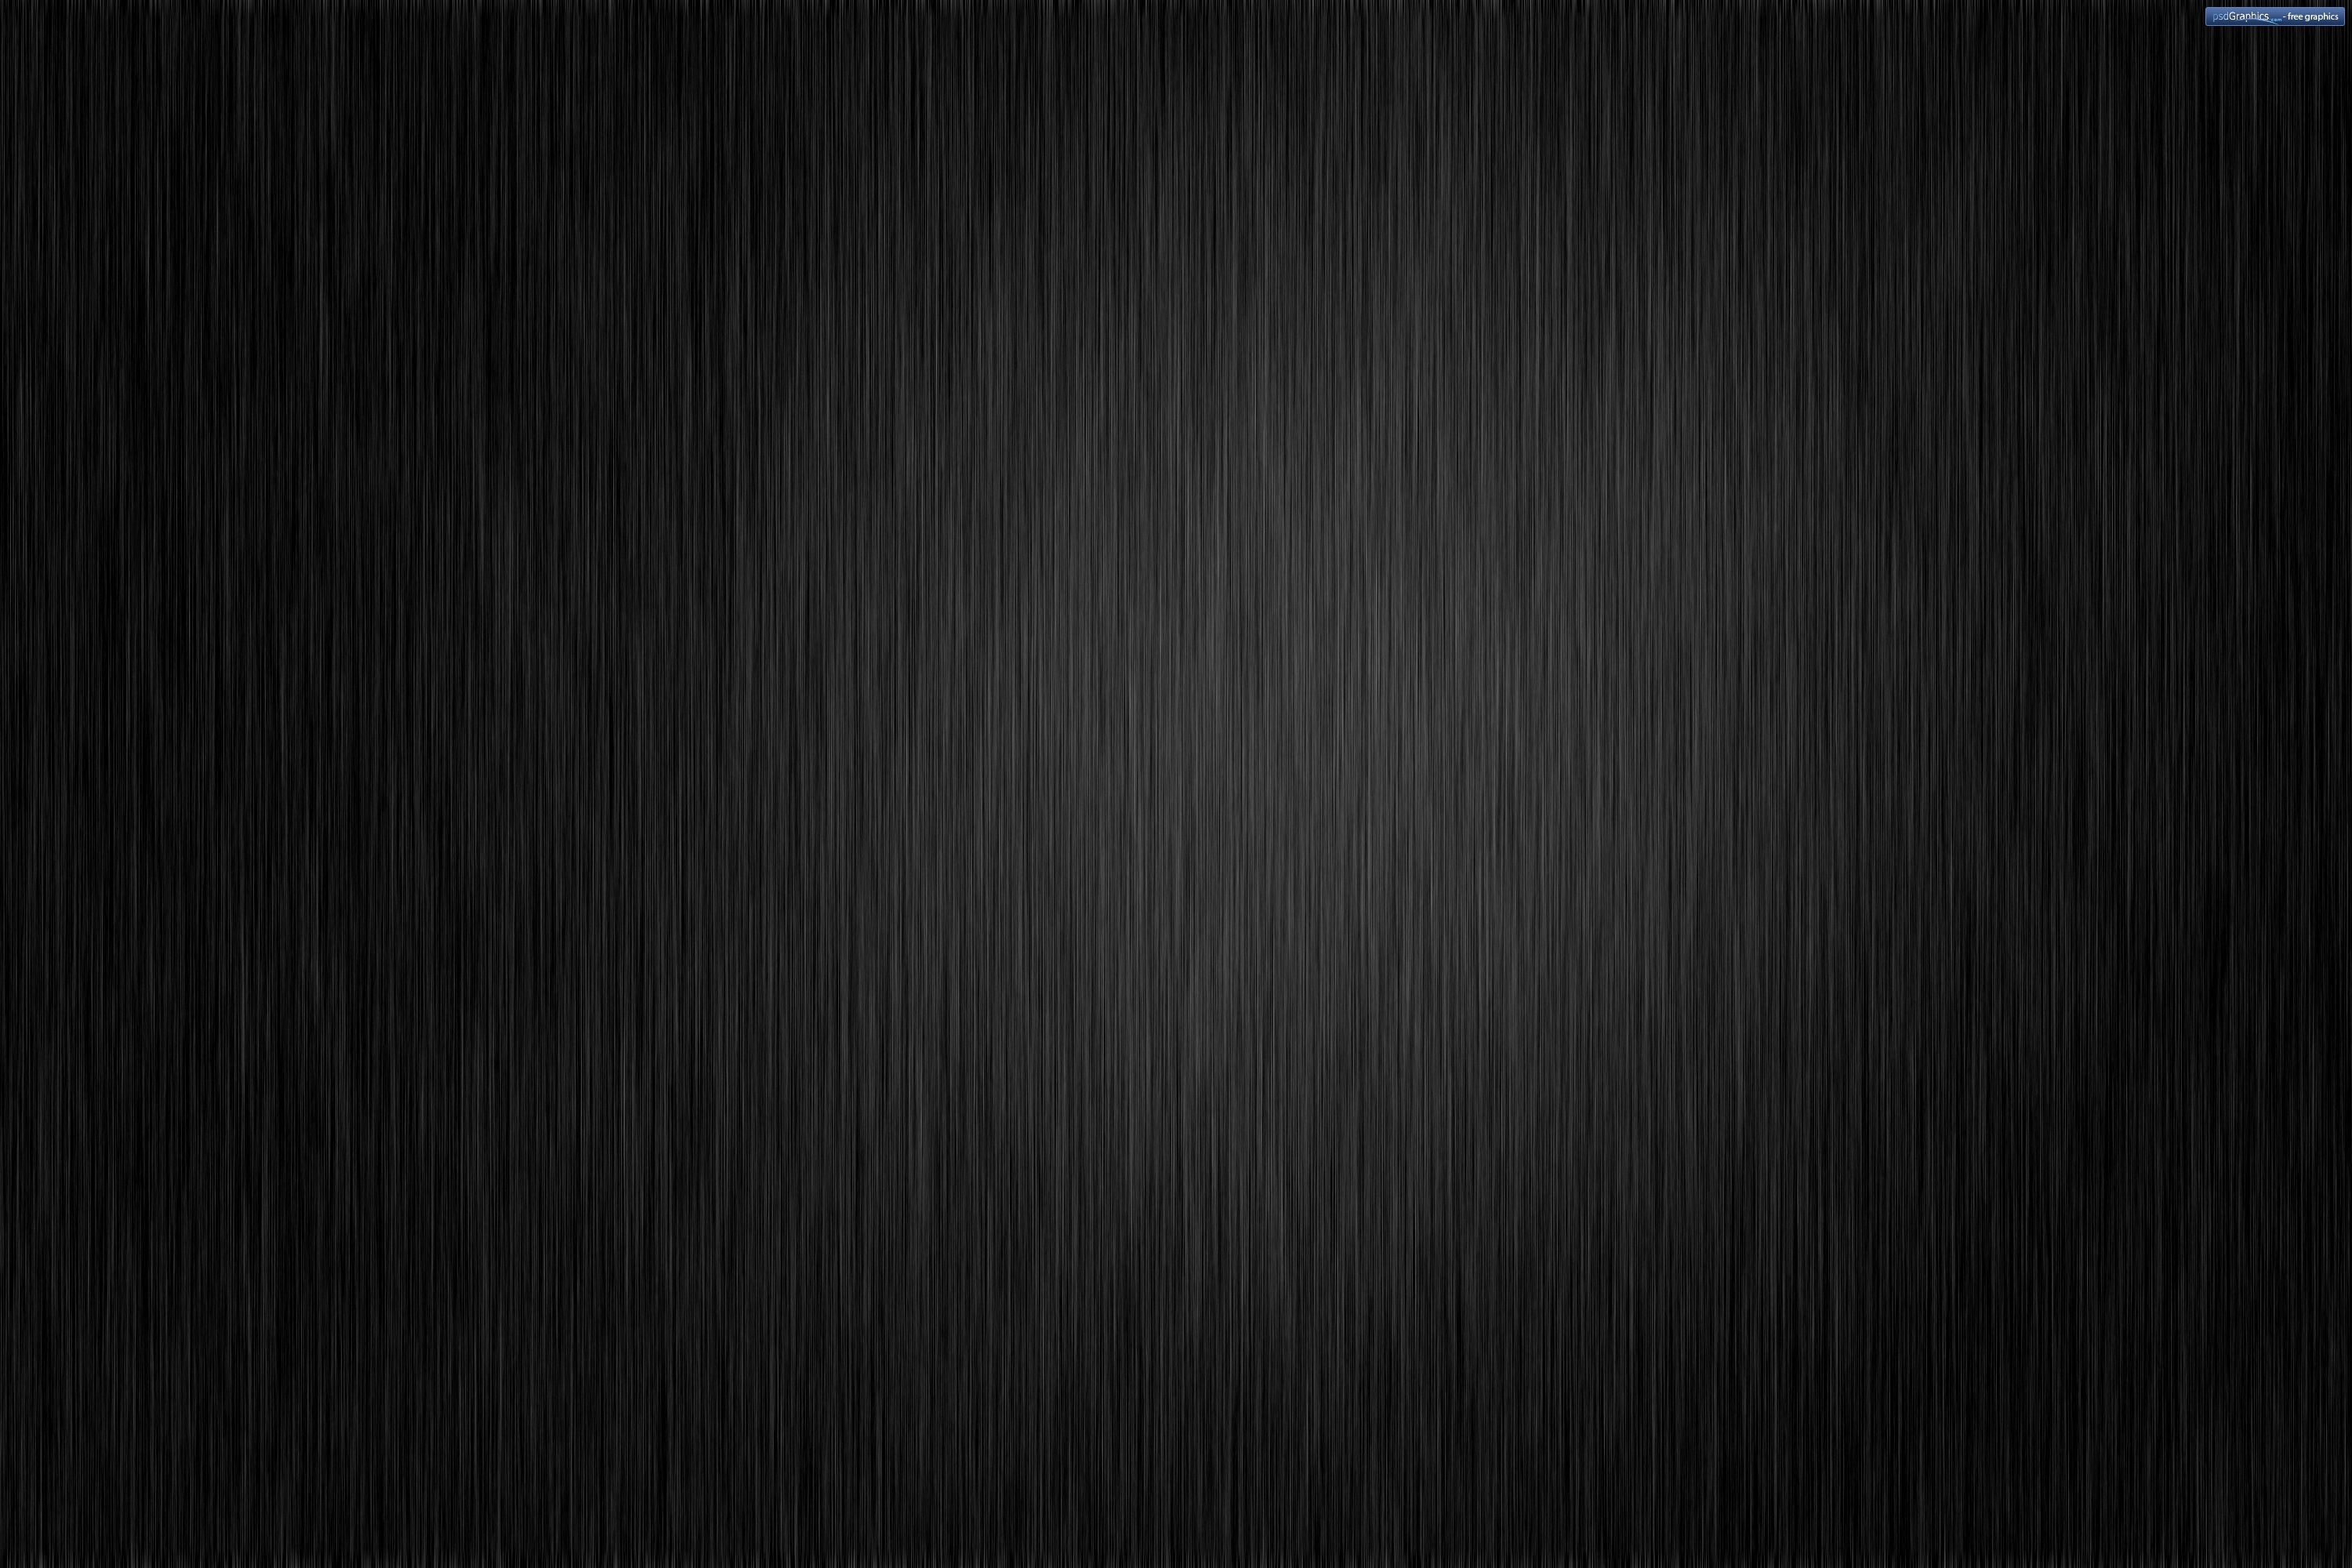 Gallery for - black gloomy background